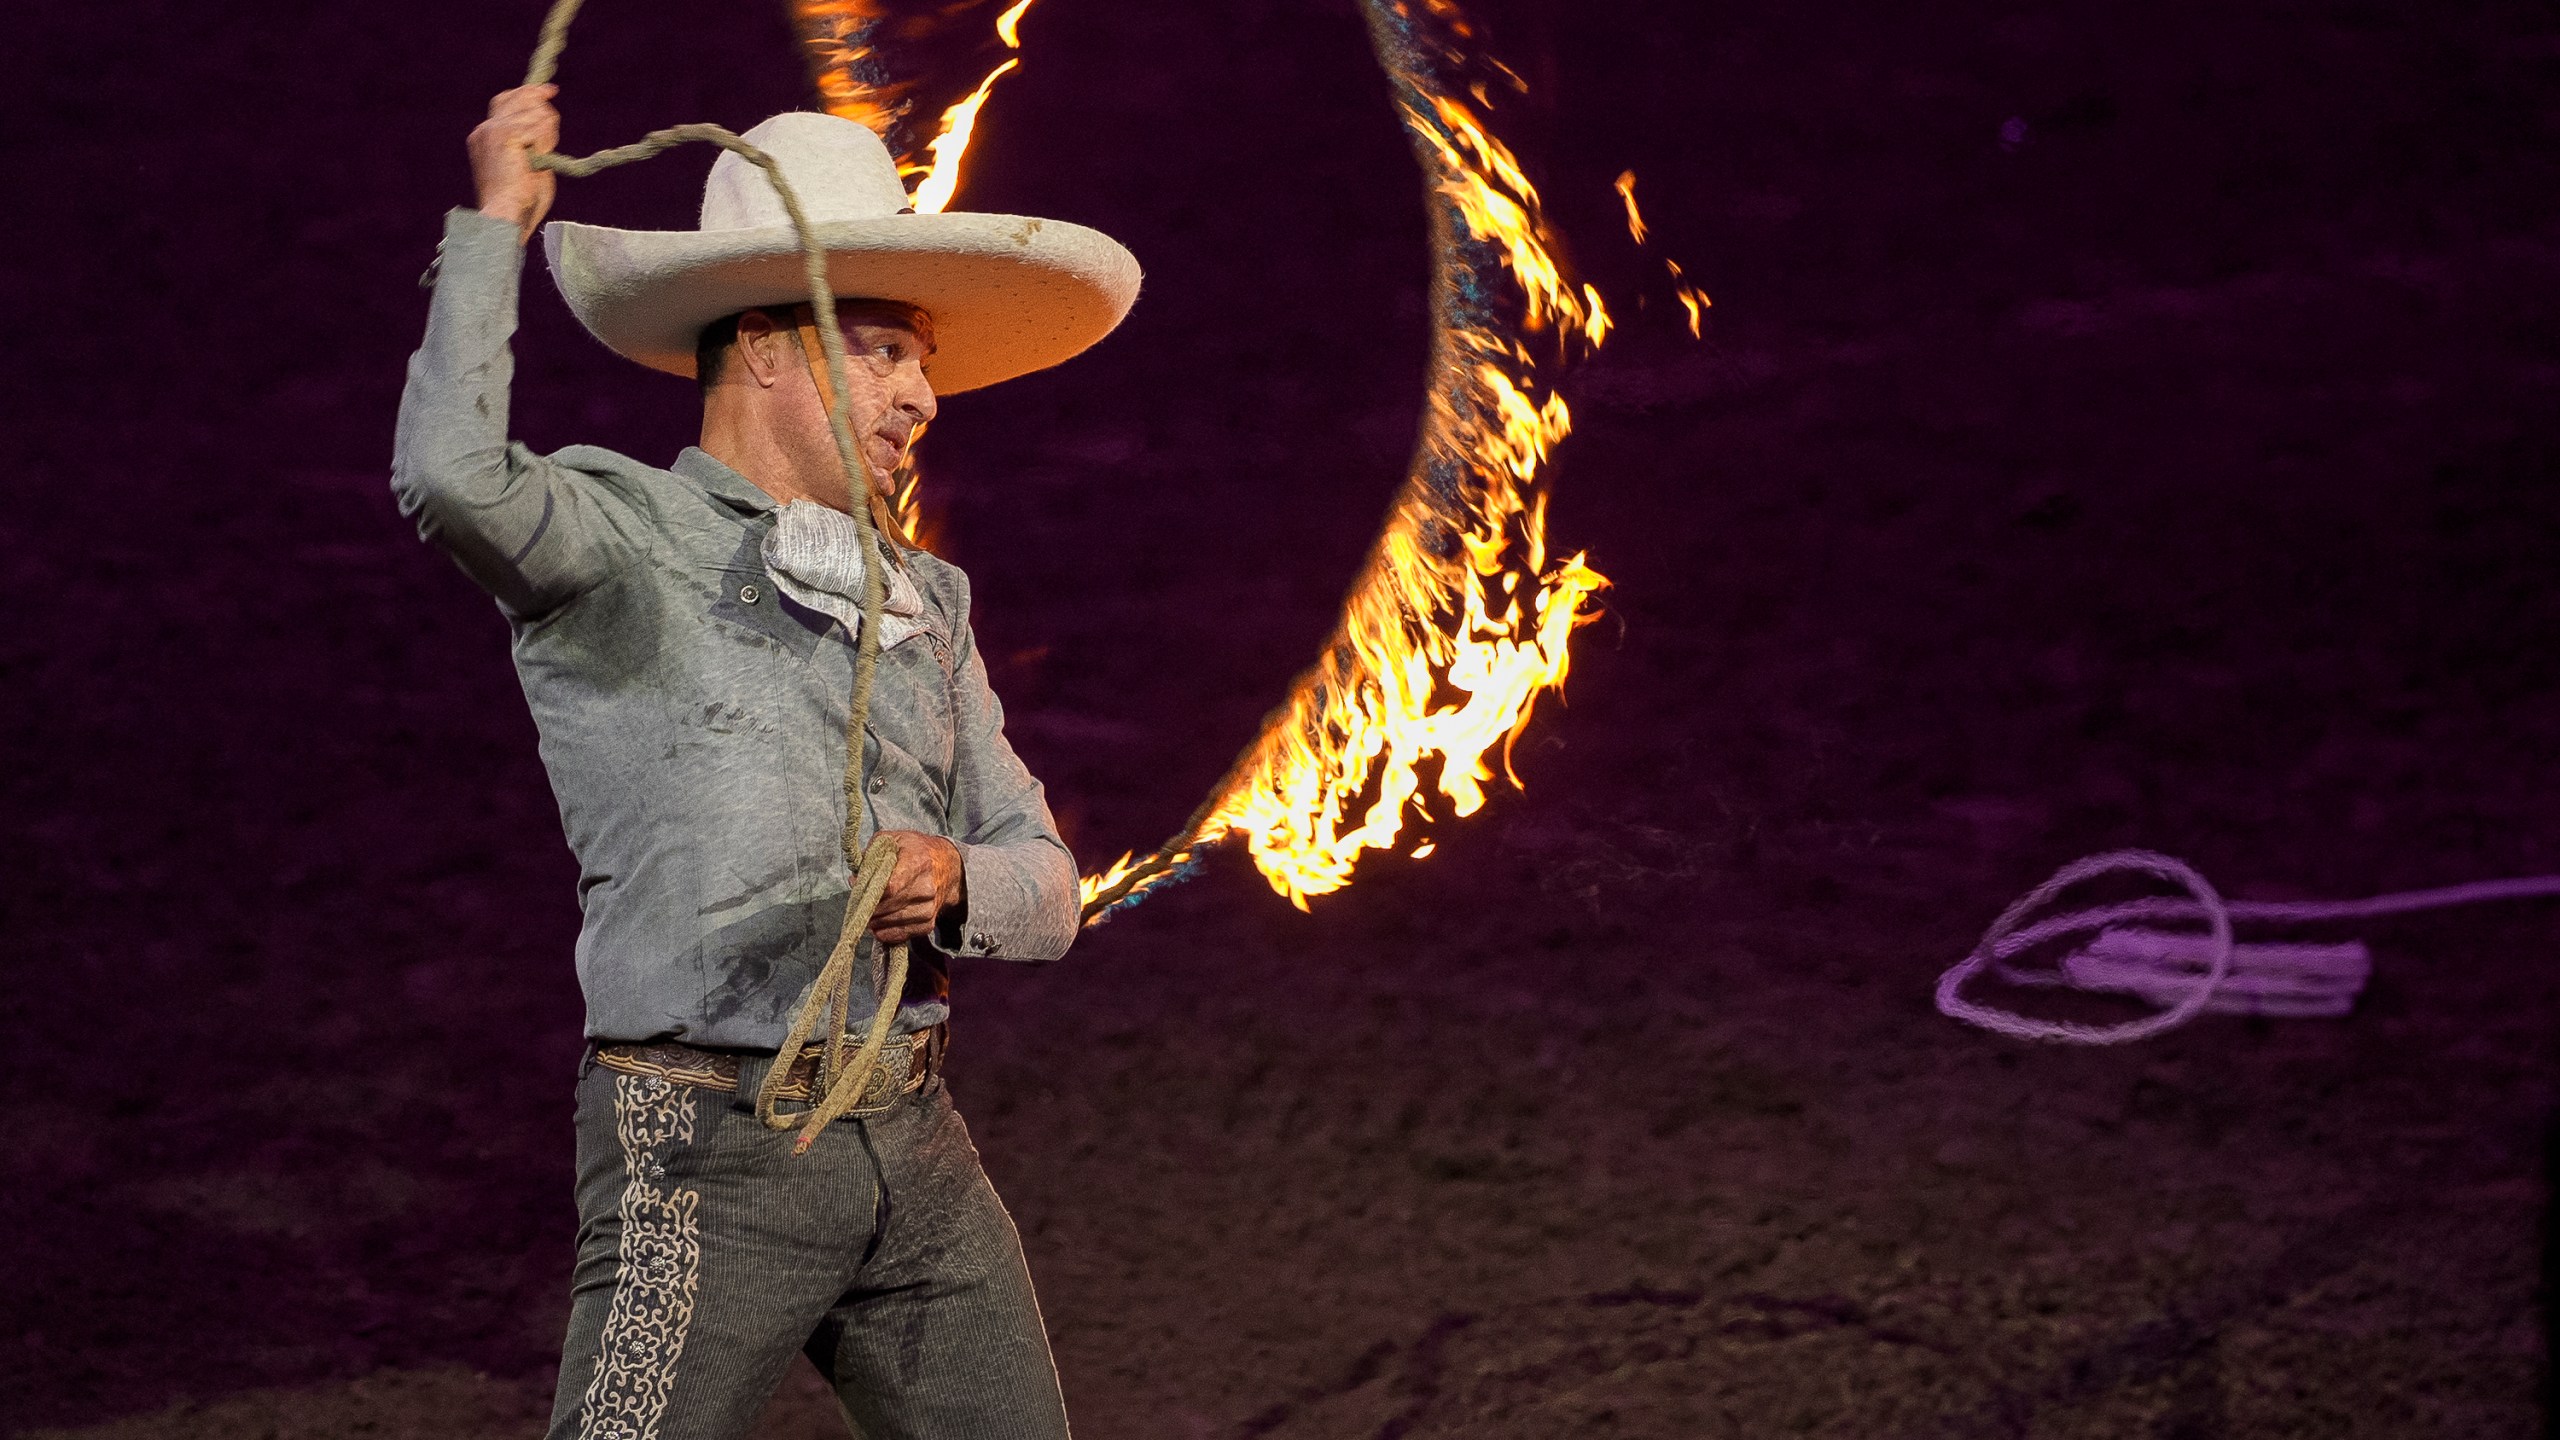 Luis Miguel Rivera performs tricks with a rope in fire at the "Jaripeo Hasta Los Huesos Tour 2024" show at the Honda Center in Anaheim, Calif., on Friday, March 29, 2024. The Grammy-winning singer songwriter Pepe Aguilar show pays tribute to the Day of the Dead, a well-known Mexican celebration. (AP Photo/Damian Dovarganes)